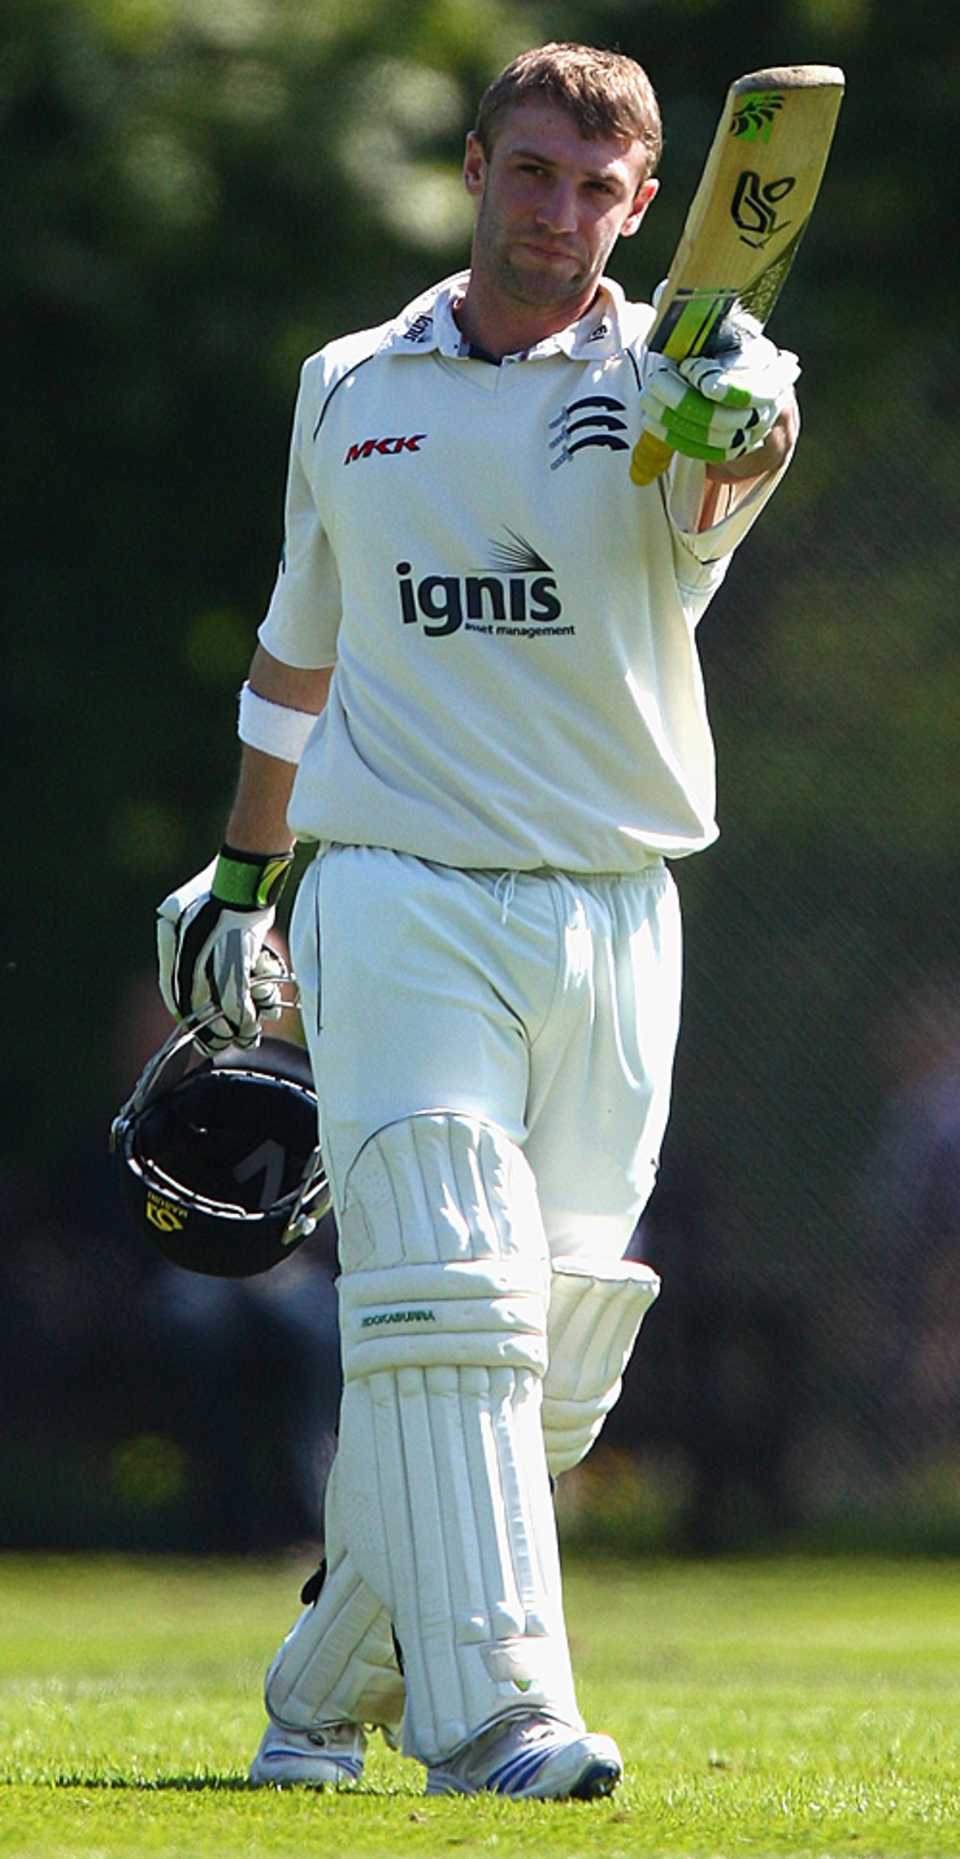 Phillip Hughes raises his bat on reaching his second hundred of the season for Middlesex, Middlesex v Leicestershire, County Championship, Southgate, April 29, 2009